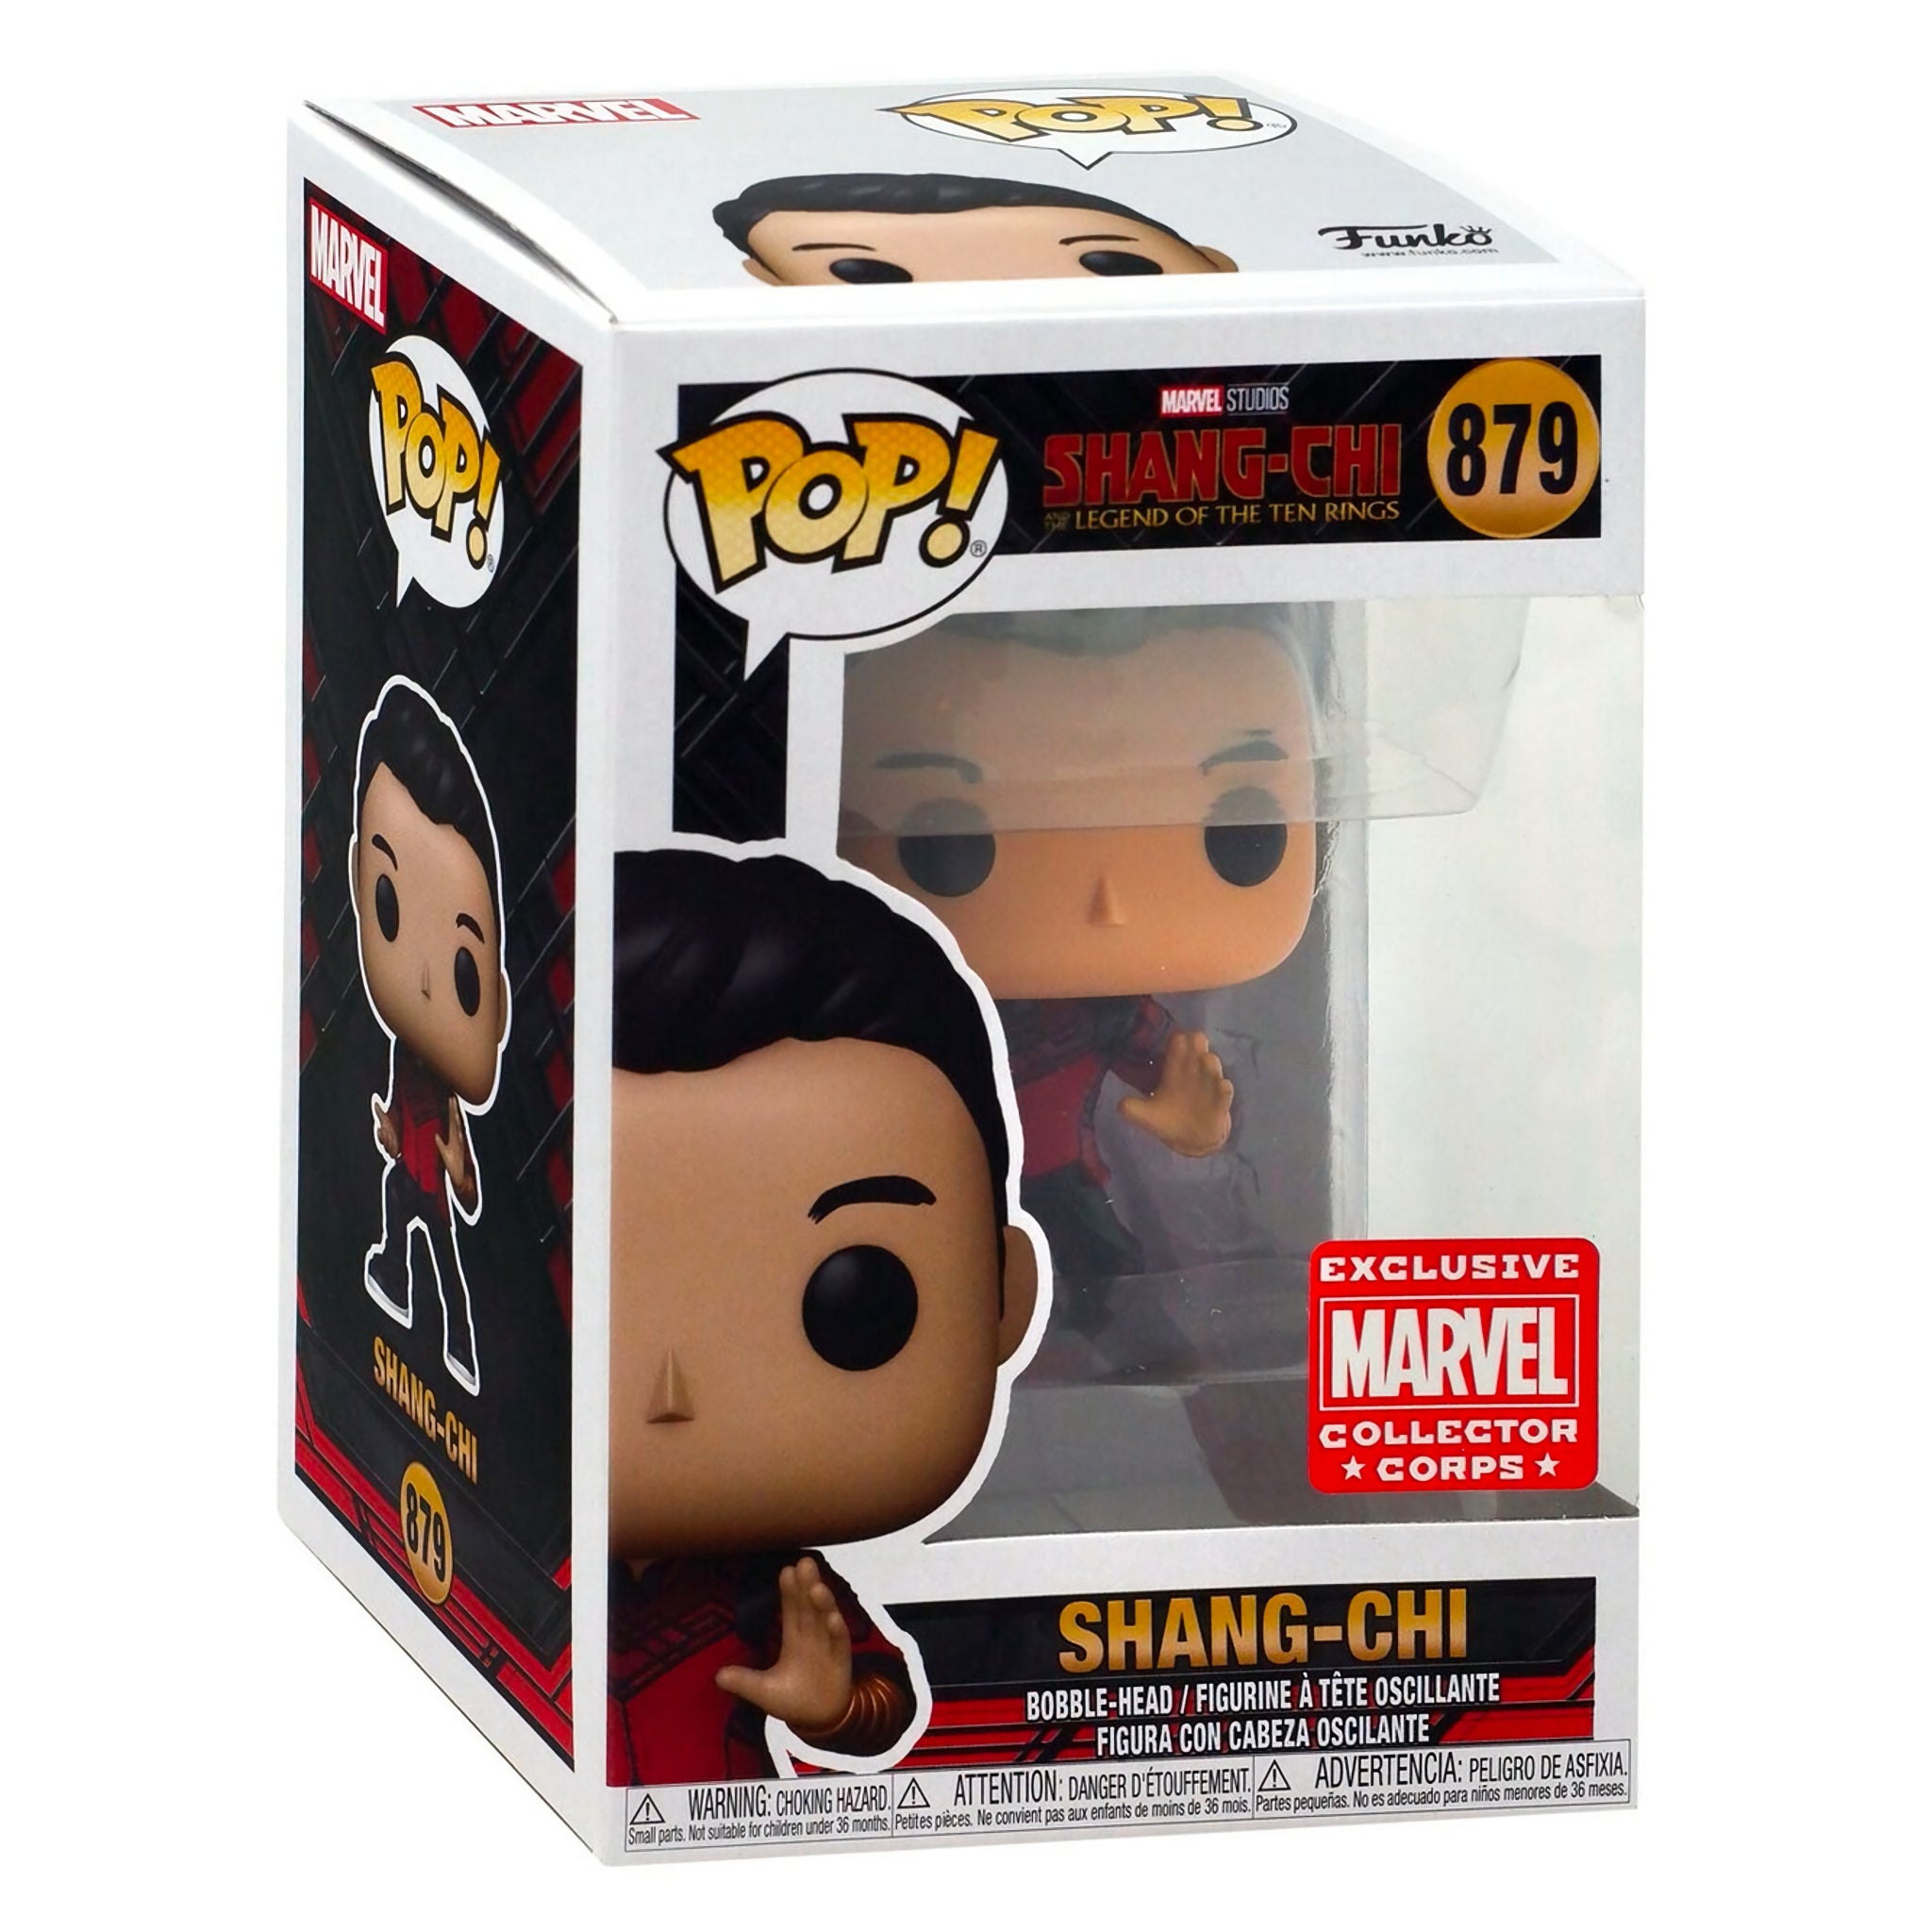 Shang-Chi Funko Pop! MARVEL EXCLUSIVE